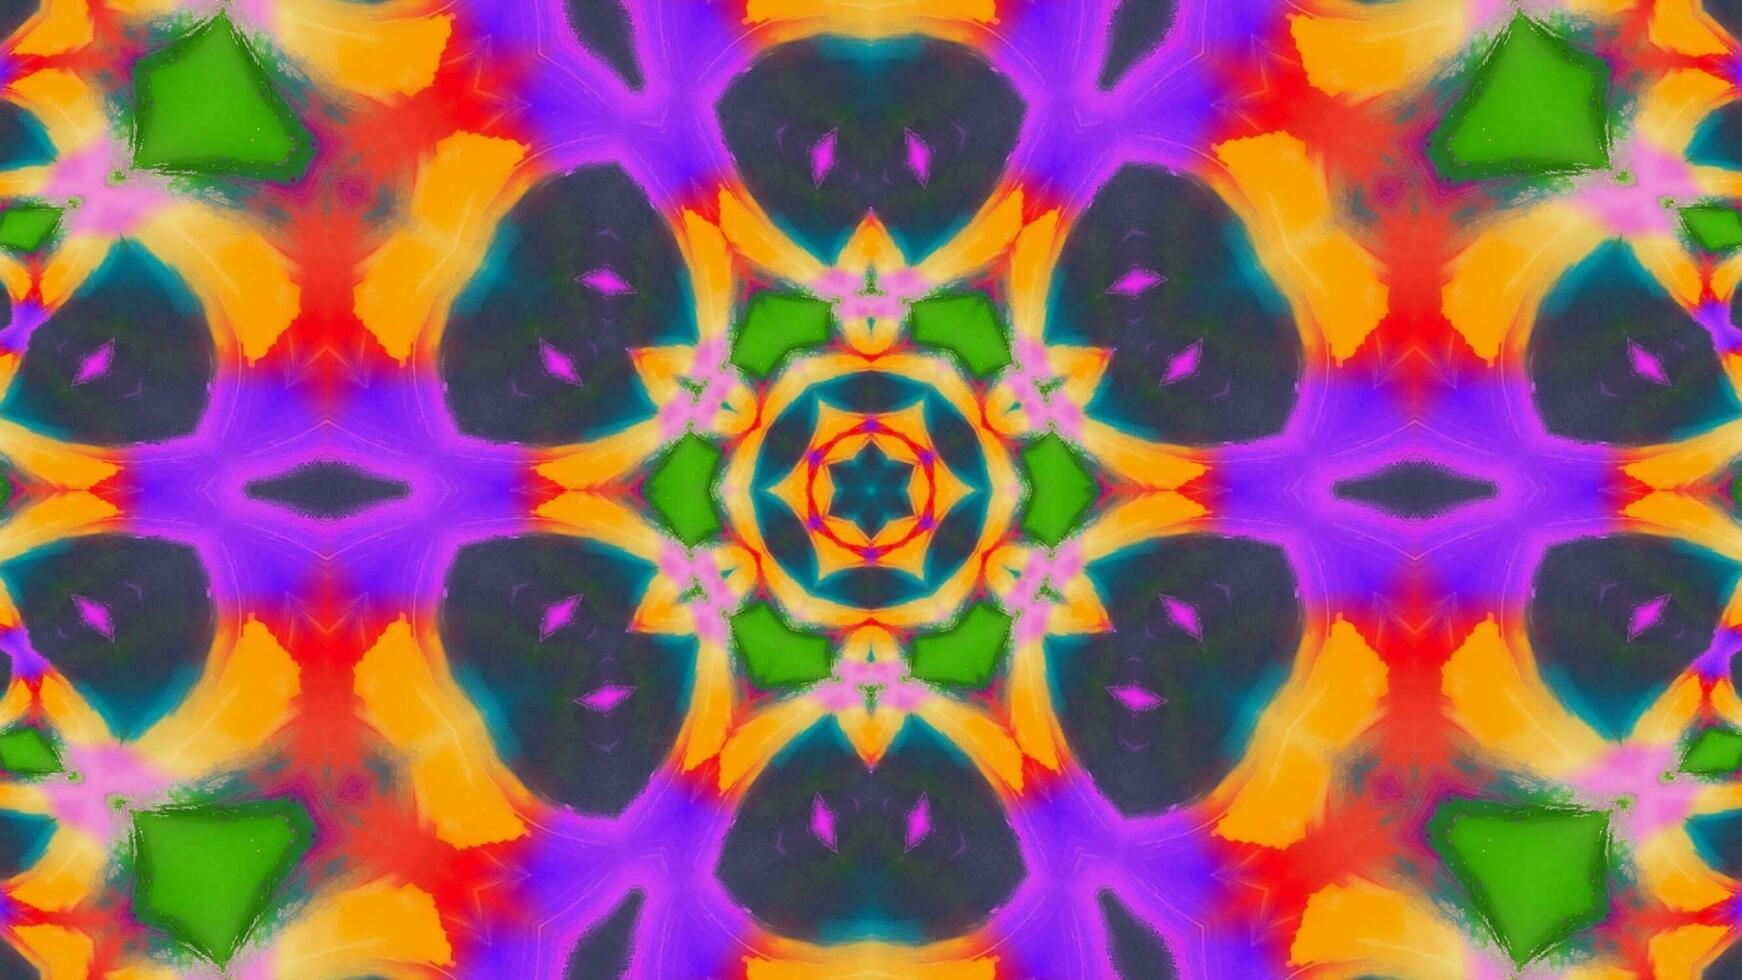 Stunning Abstract Kaleidoscope Background. Unique Multicolor Mosaic Texture in Seamless Geometric Pattern photo